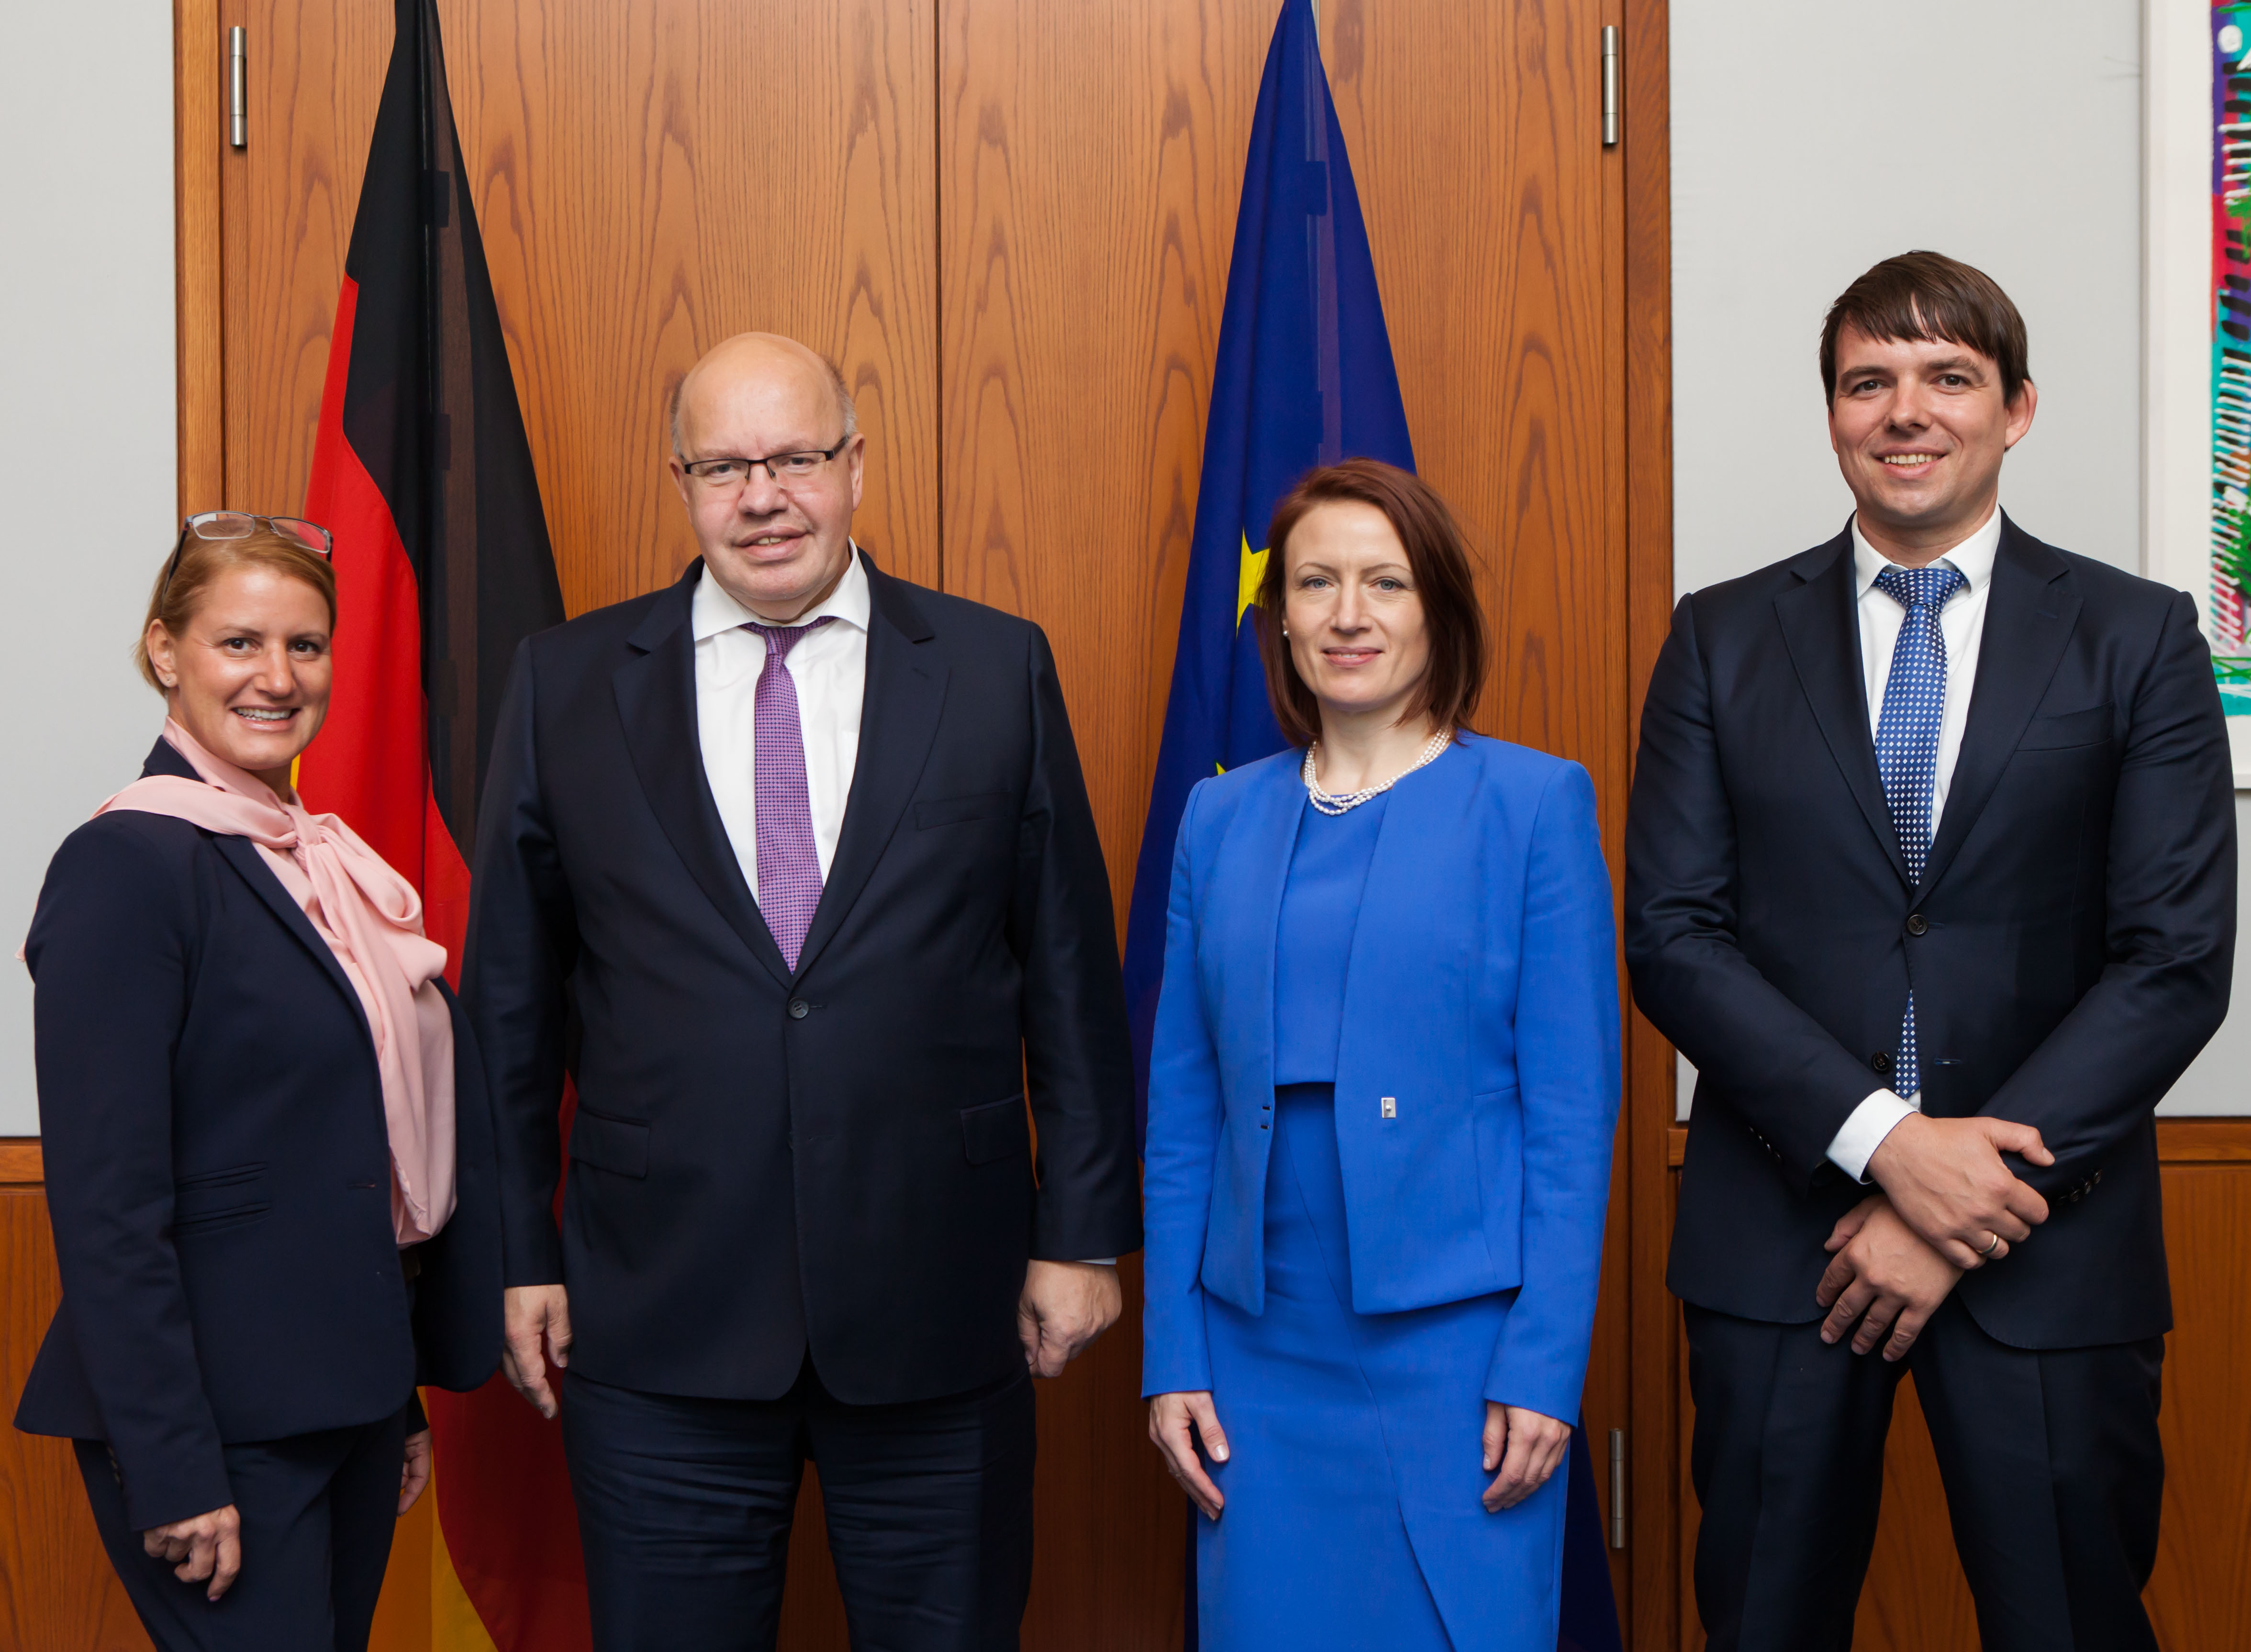 Financing Experts together with Peter Altmaier, former  Federal Minister of Economics